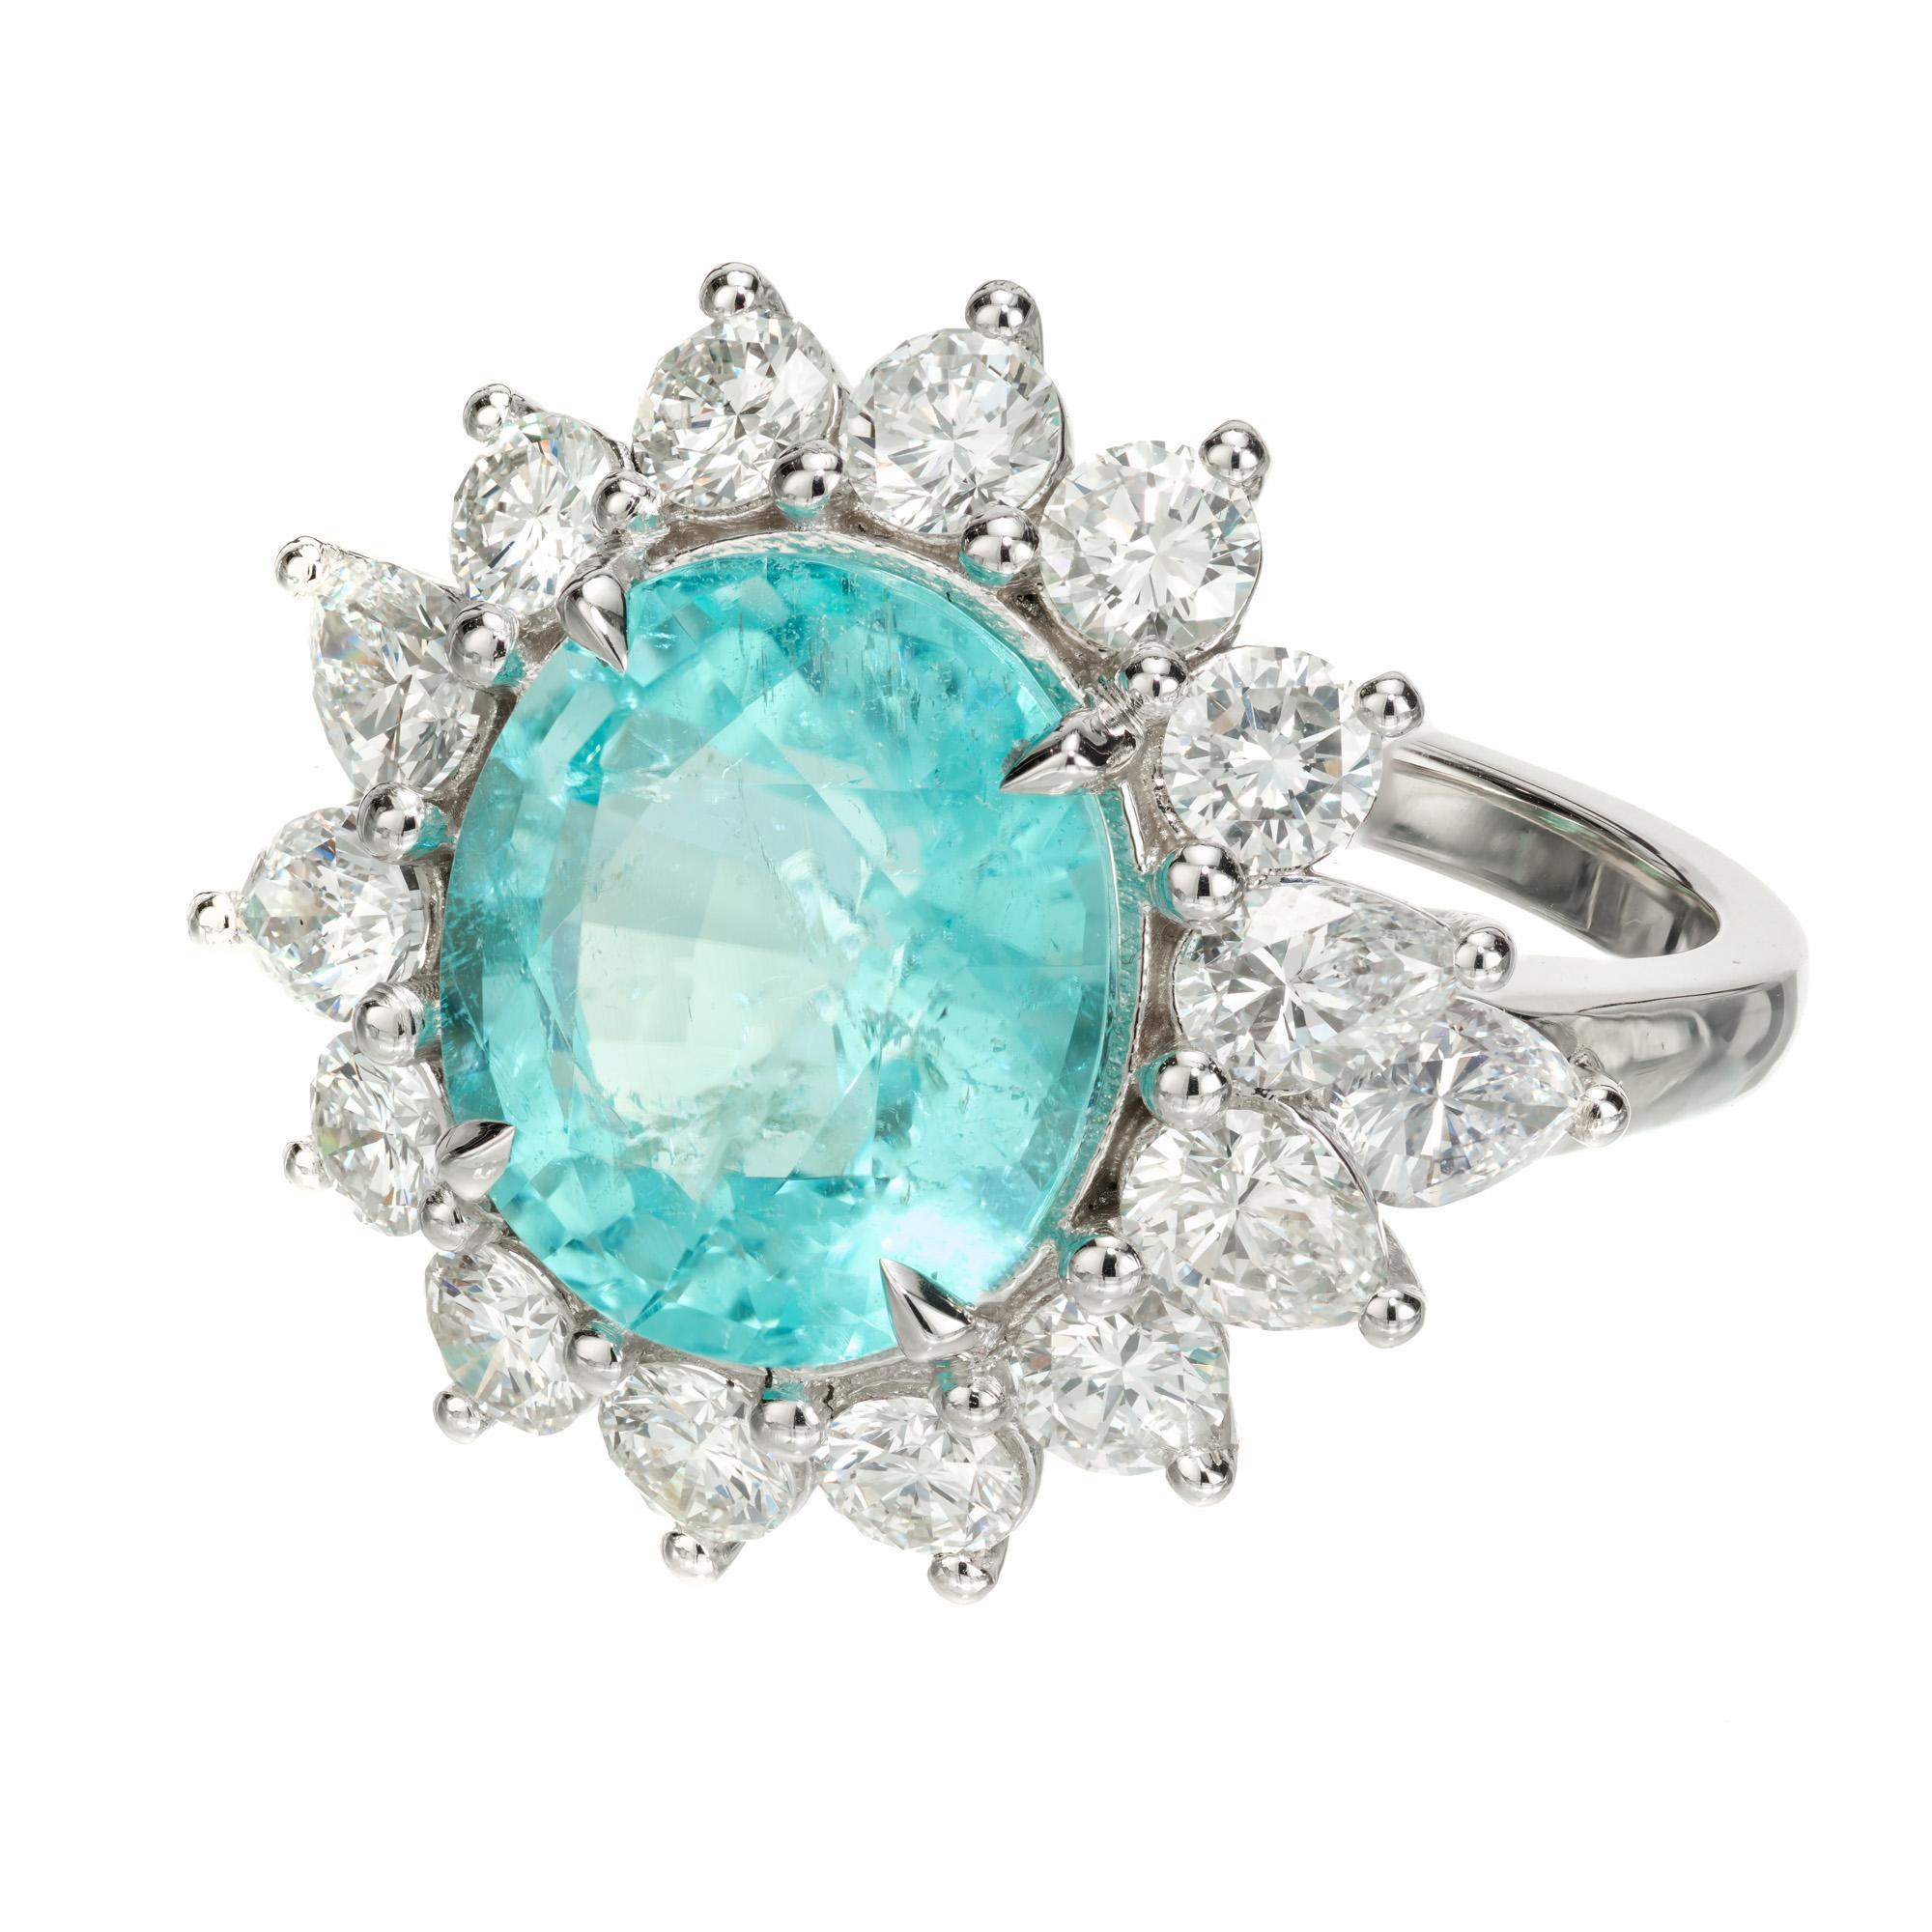 Paraiba diamond cocktail ring. GIA certified oval electric neon bright blue/green Paraiba tourmaline center stone, in a platinum setting with a halo of 10 round brilliant cut diamonds and two 6 pear shaped accent diamonds. This Paraiba has a bright